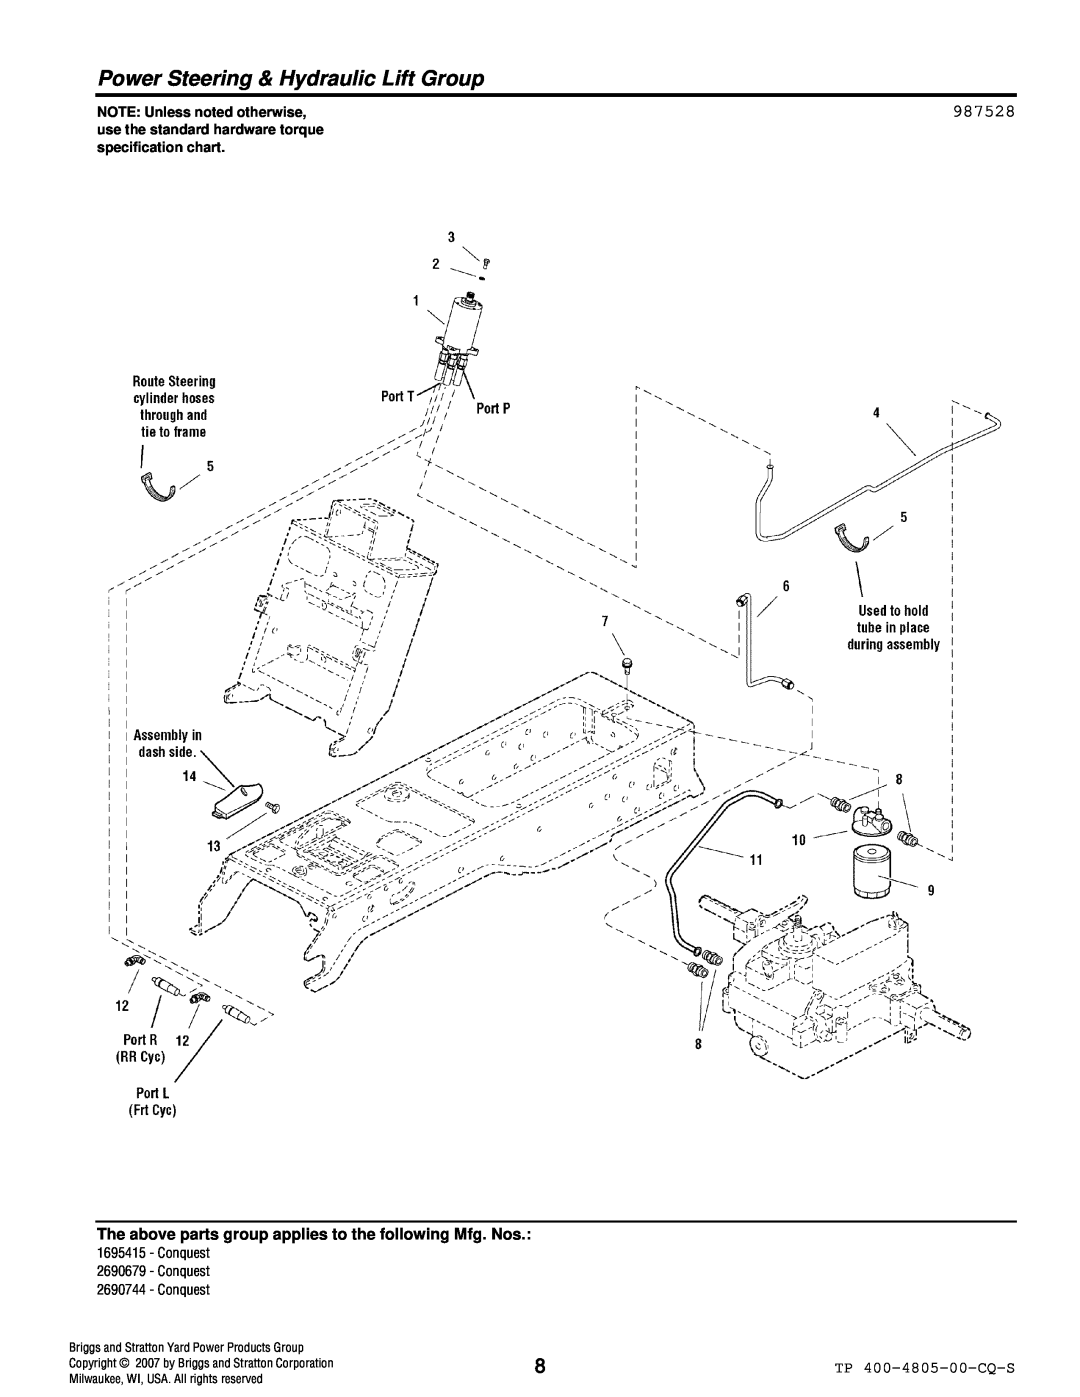 Simplicity 4WD Series manual Power Steering & Hydraulic Lift Group, 987528, NOTE: Unless noted otherwise 